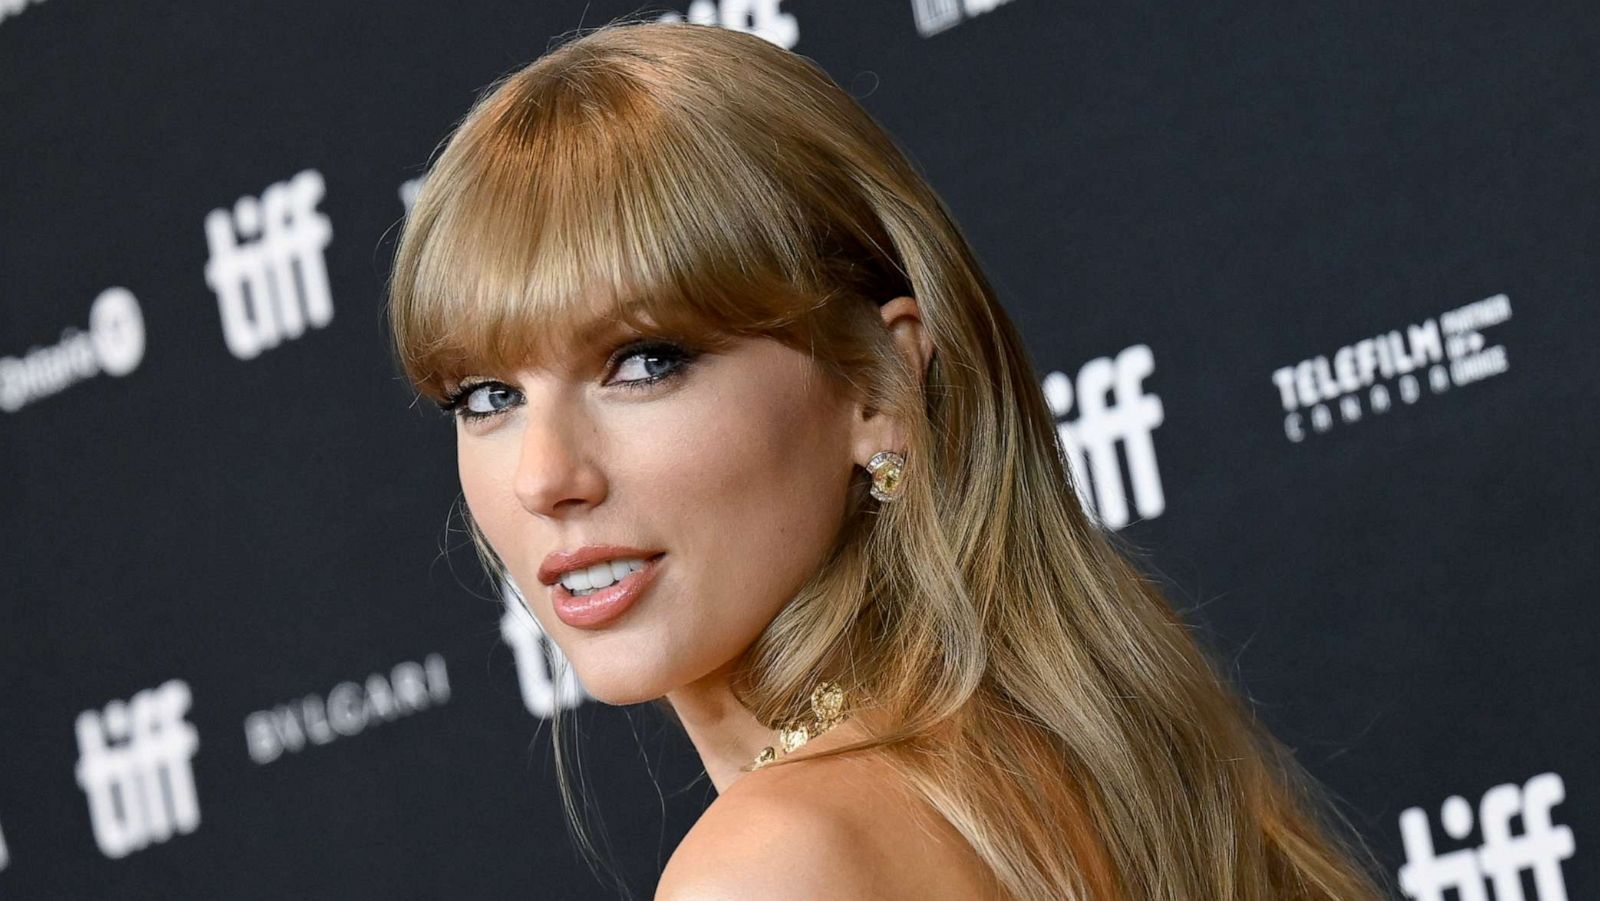 AP - The year of Taylor Swift continues. Time Magazine